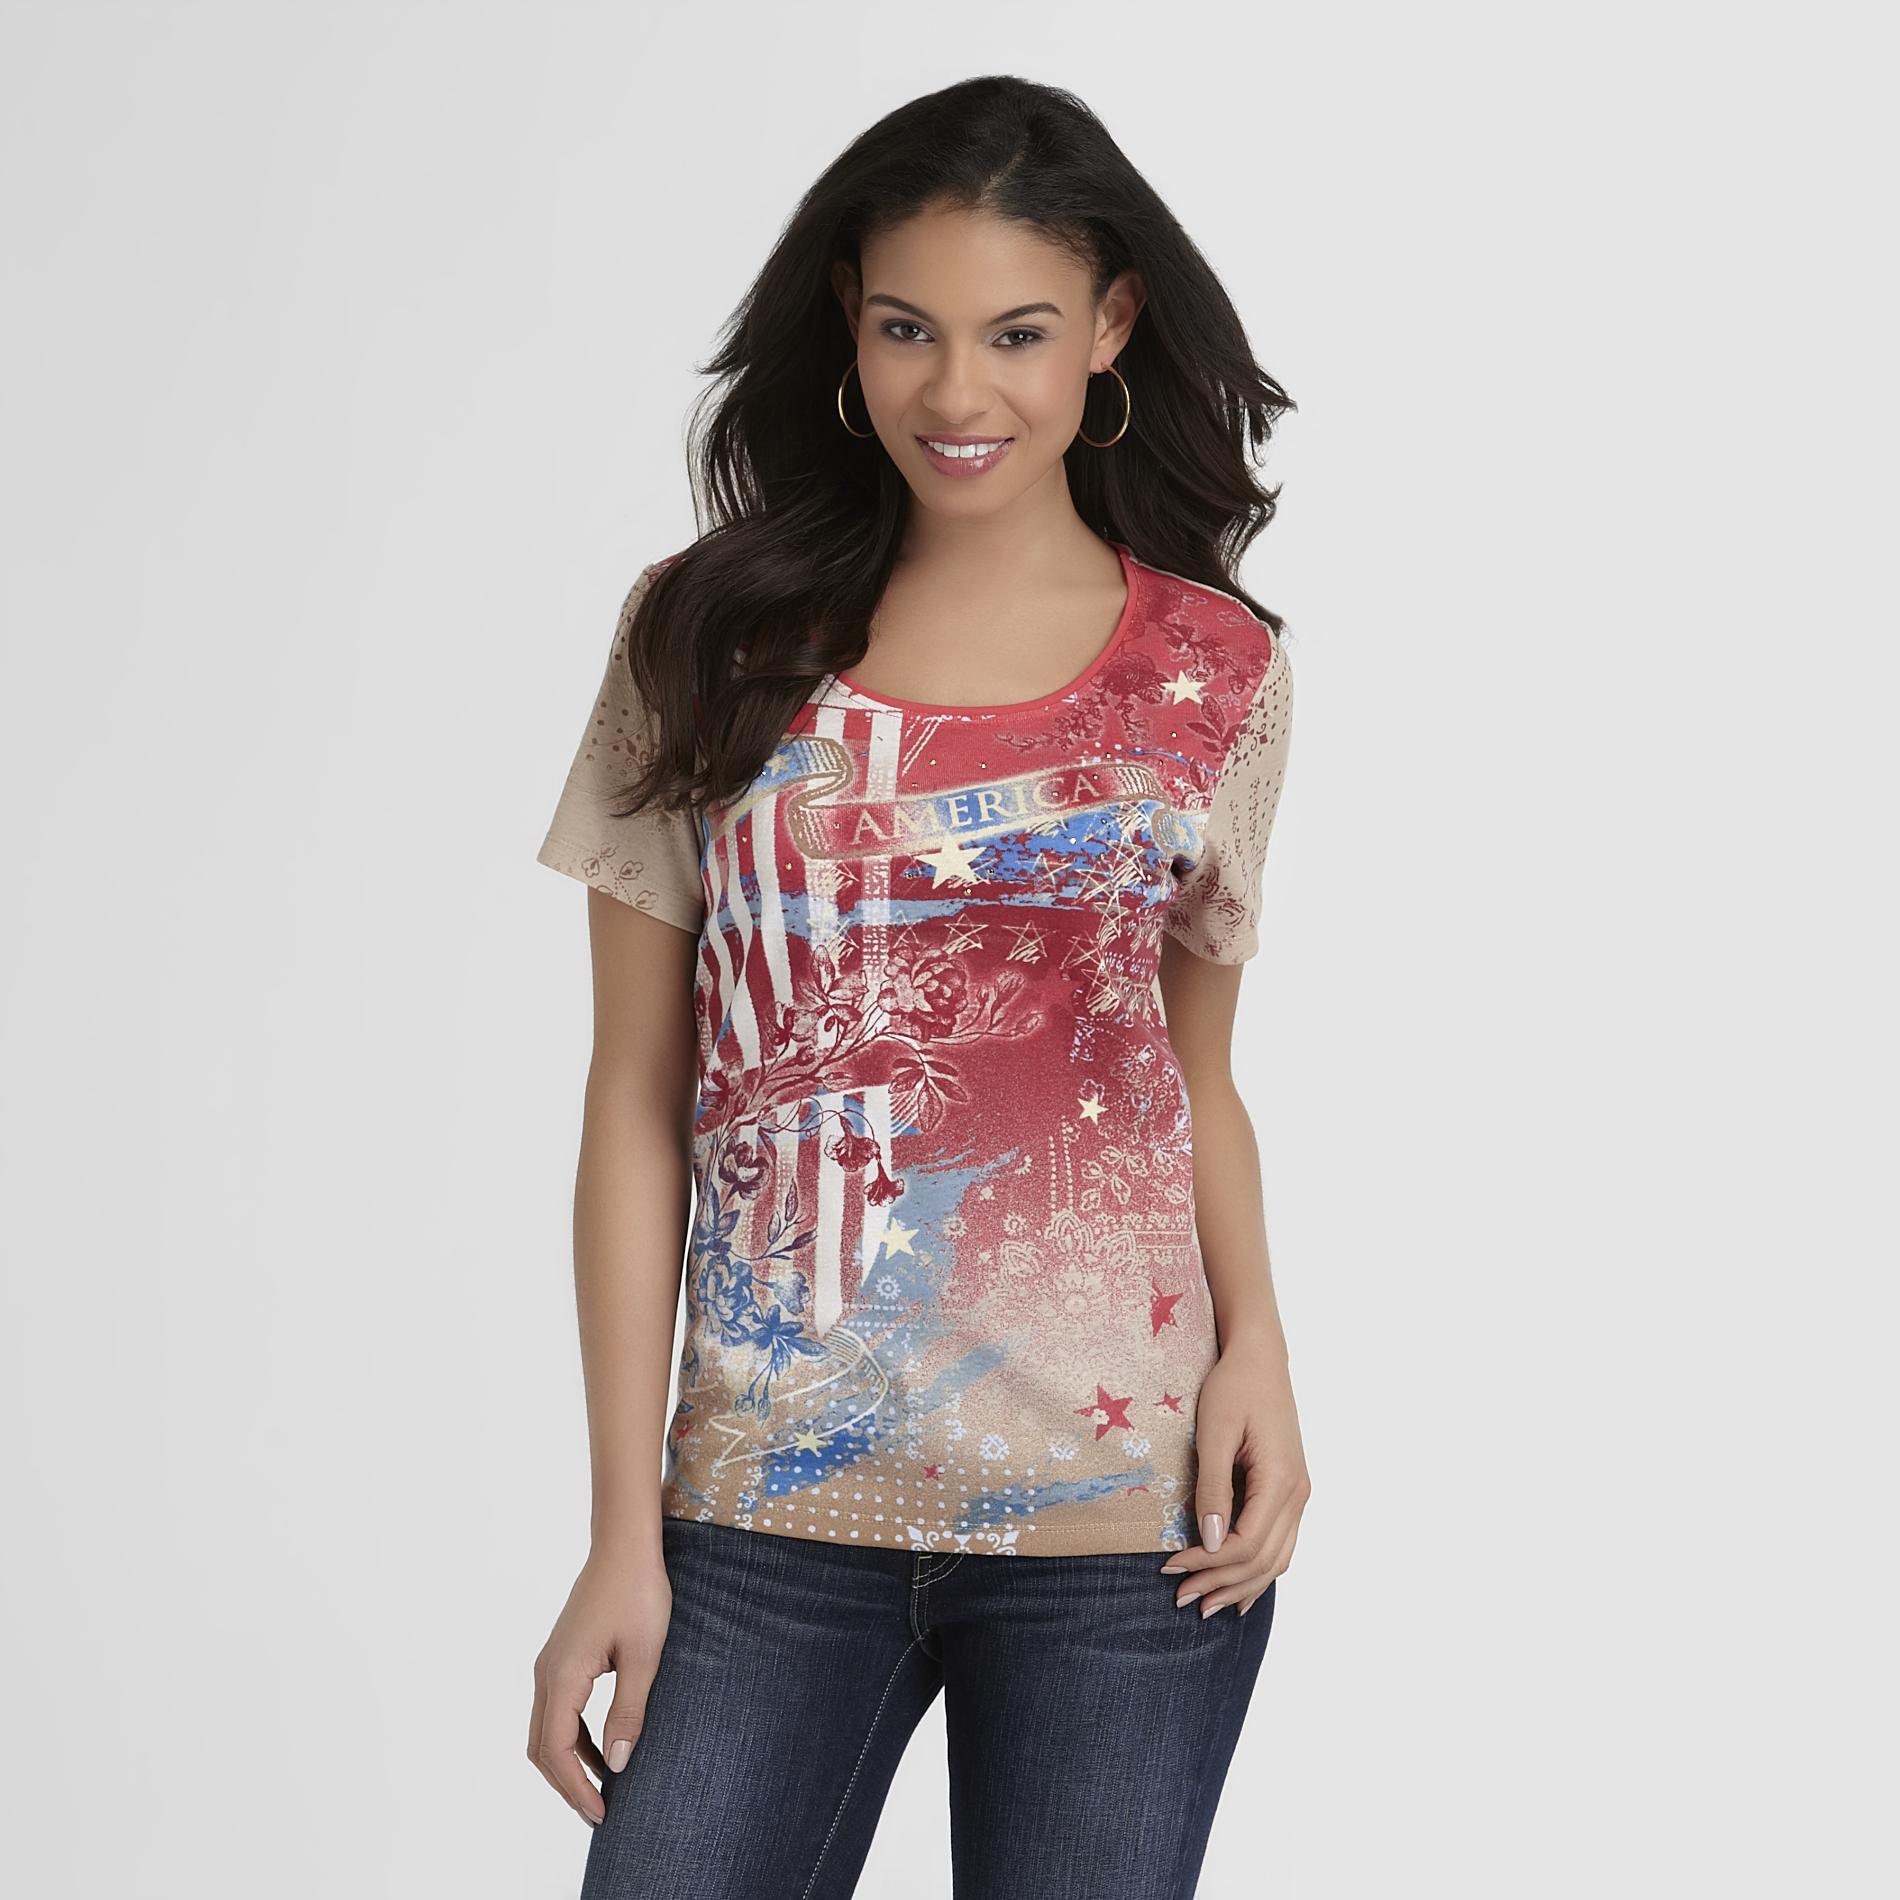 Holiday Editions Women's Graphic T-Shirt - America